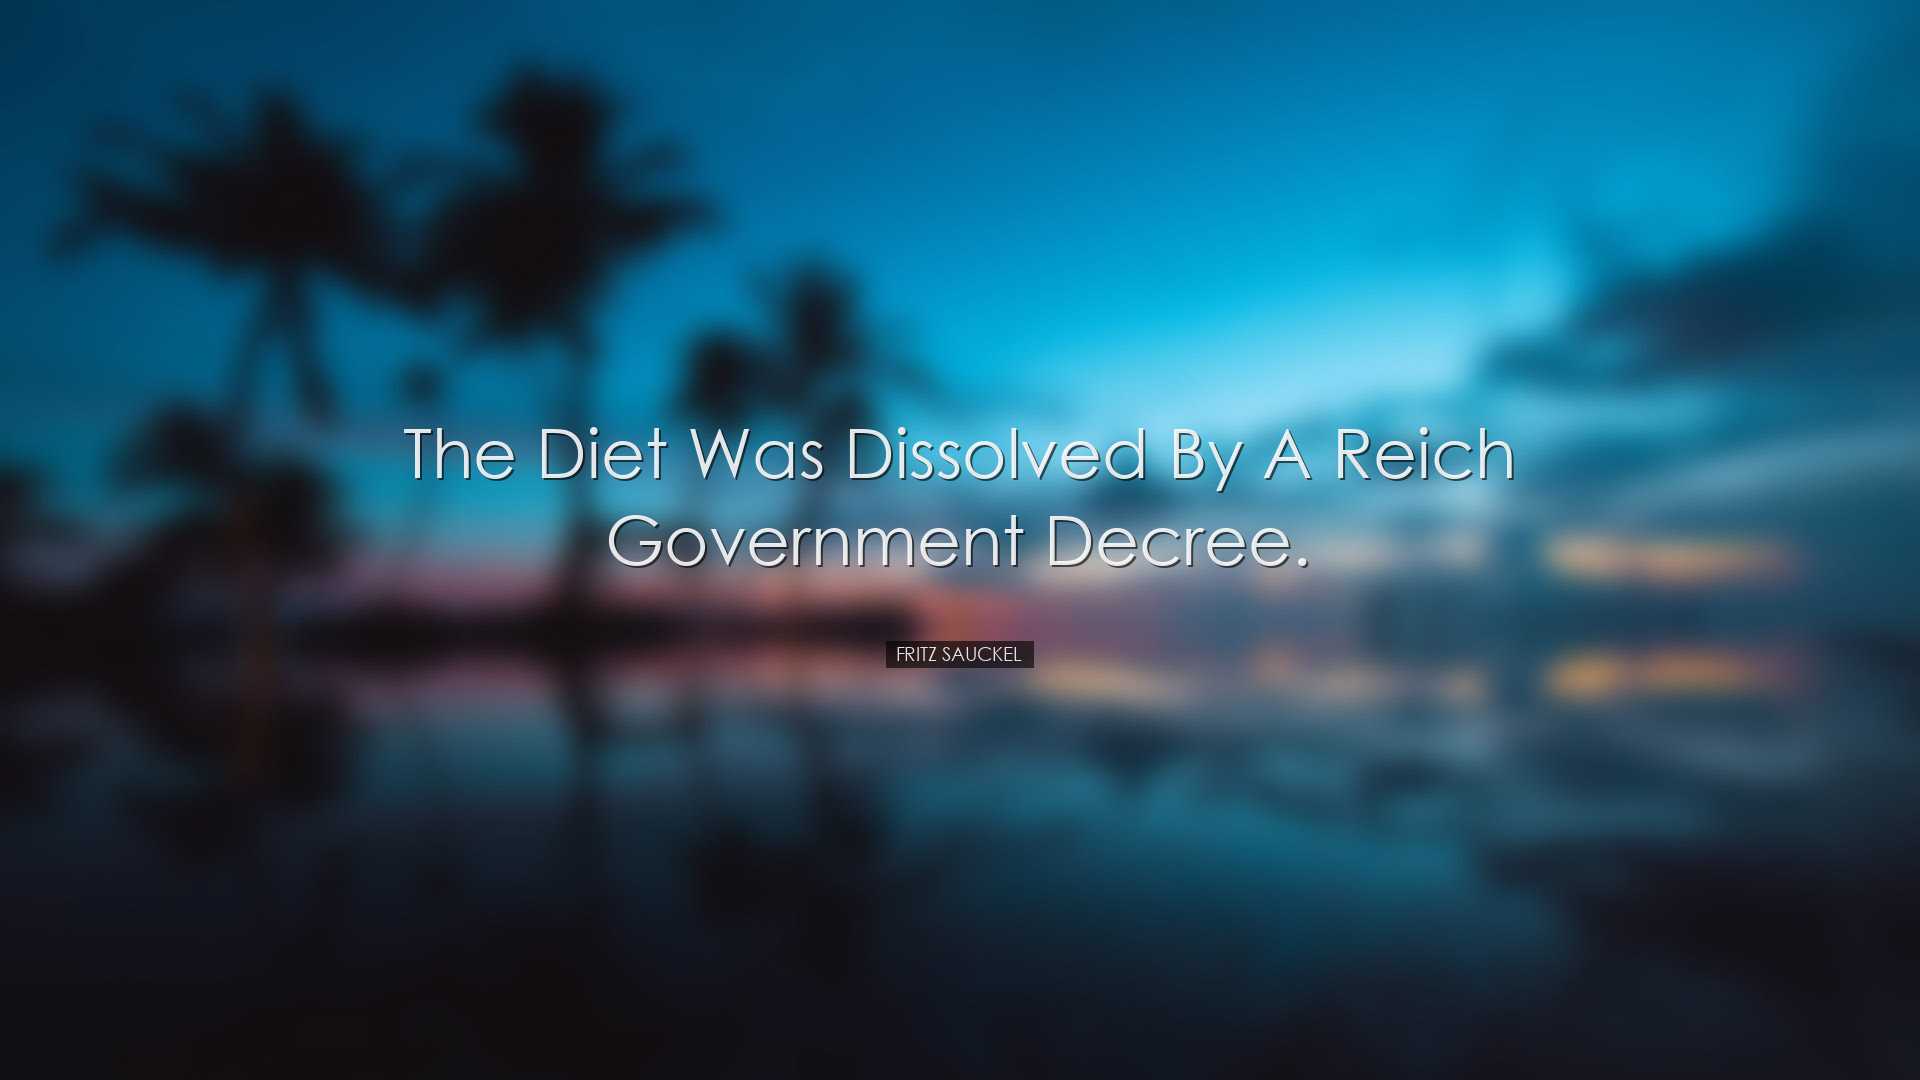 The Diet was dissolved by a Reich Government decree. - Fritz Sauck